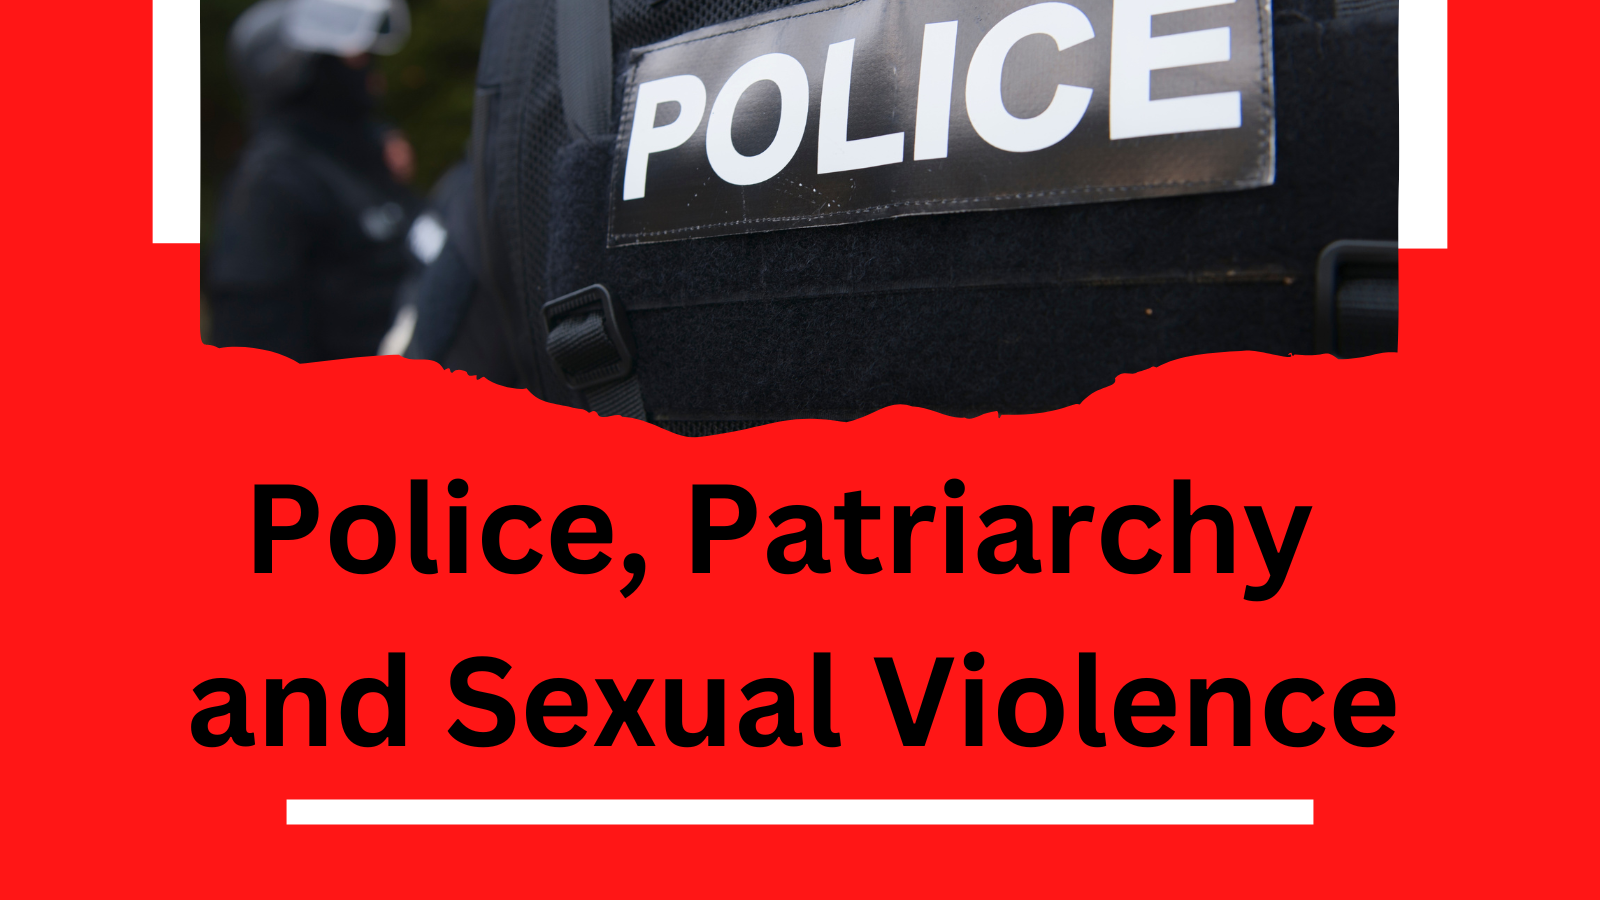 Police, Patriarchy and Sexual Violence